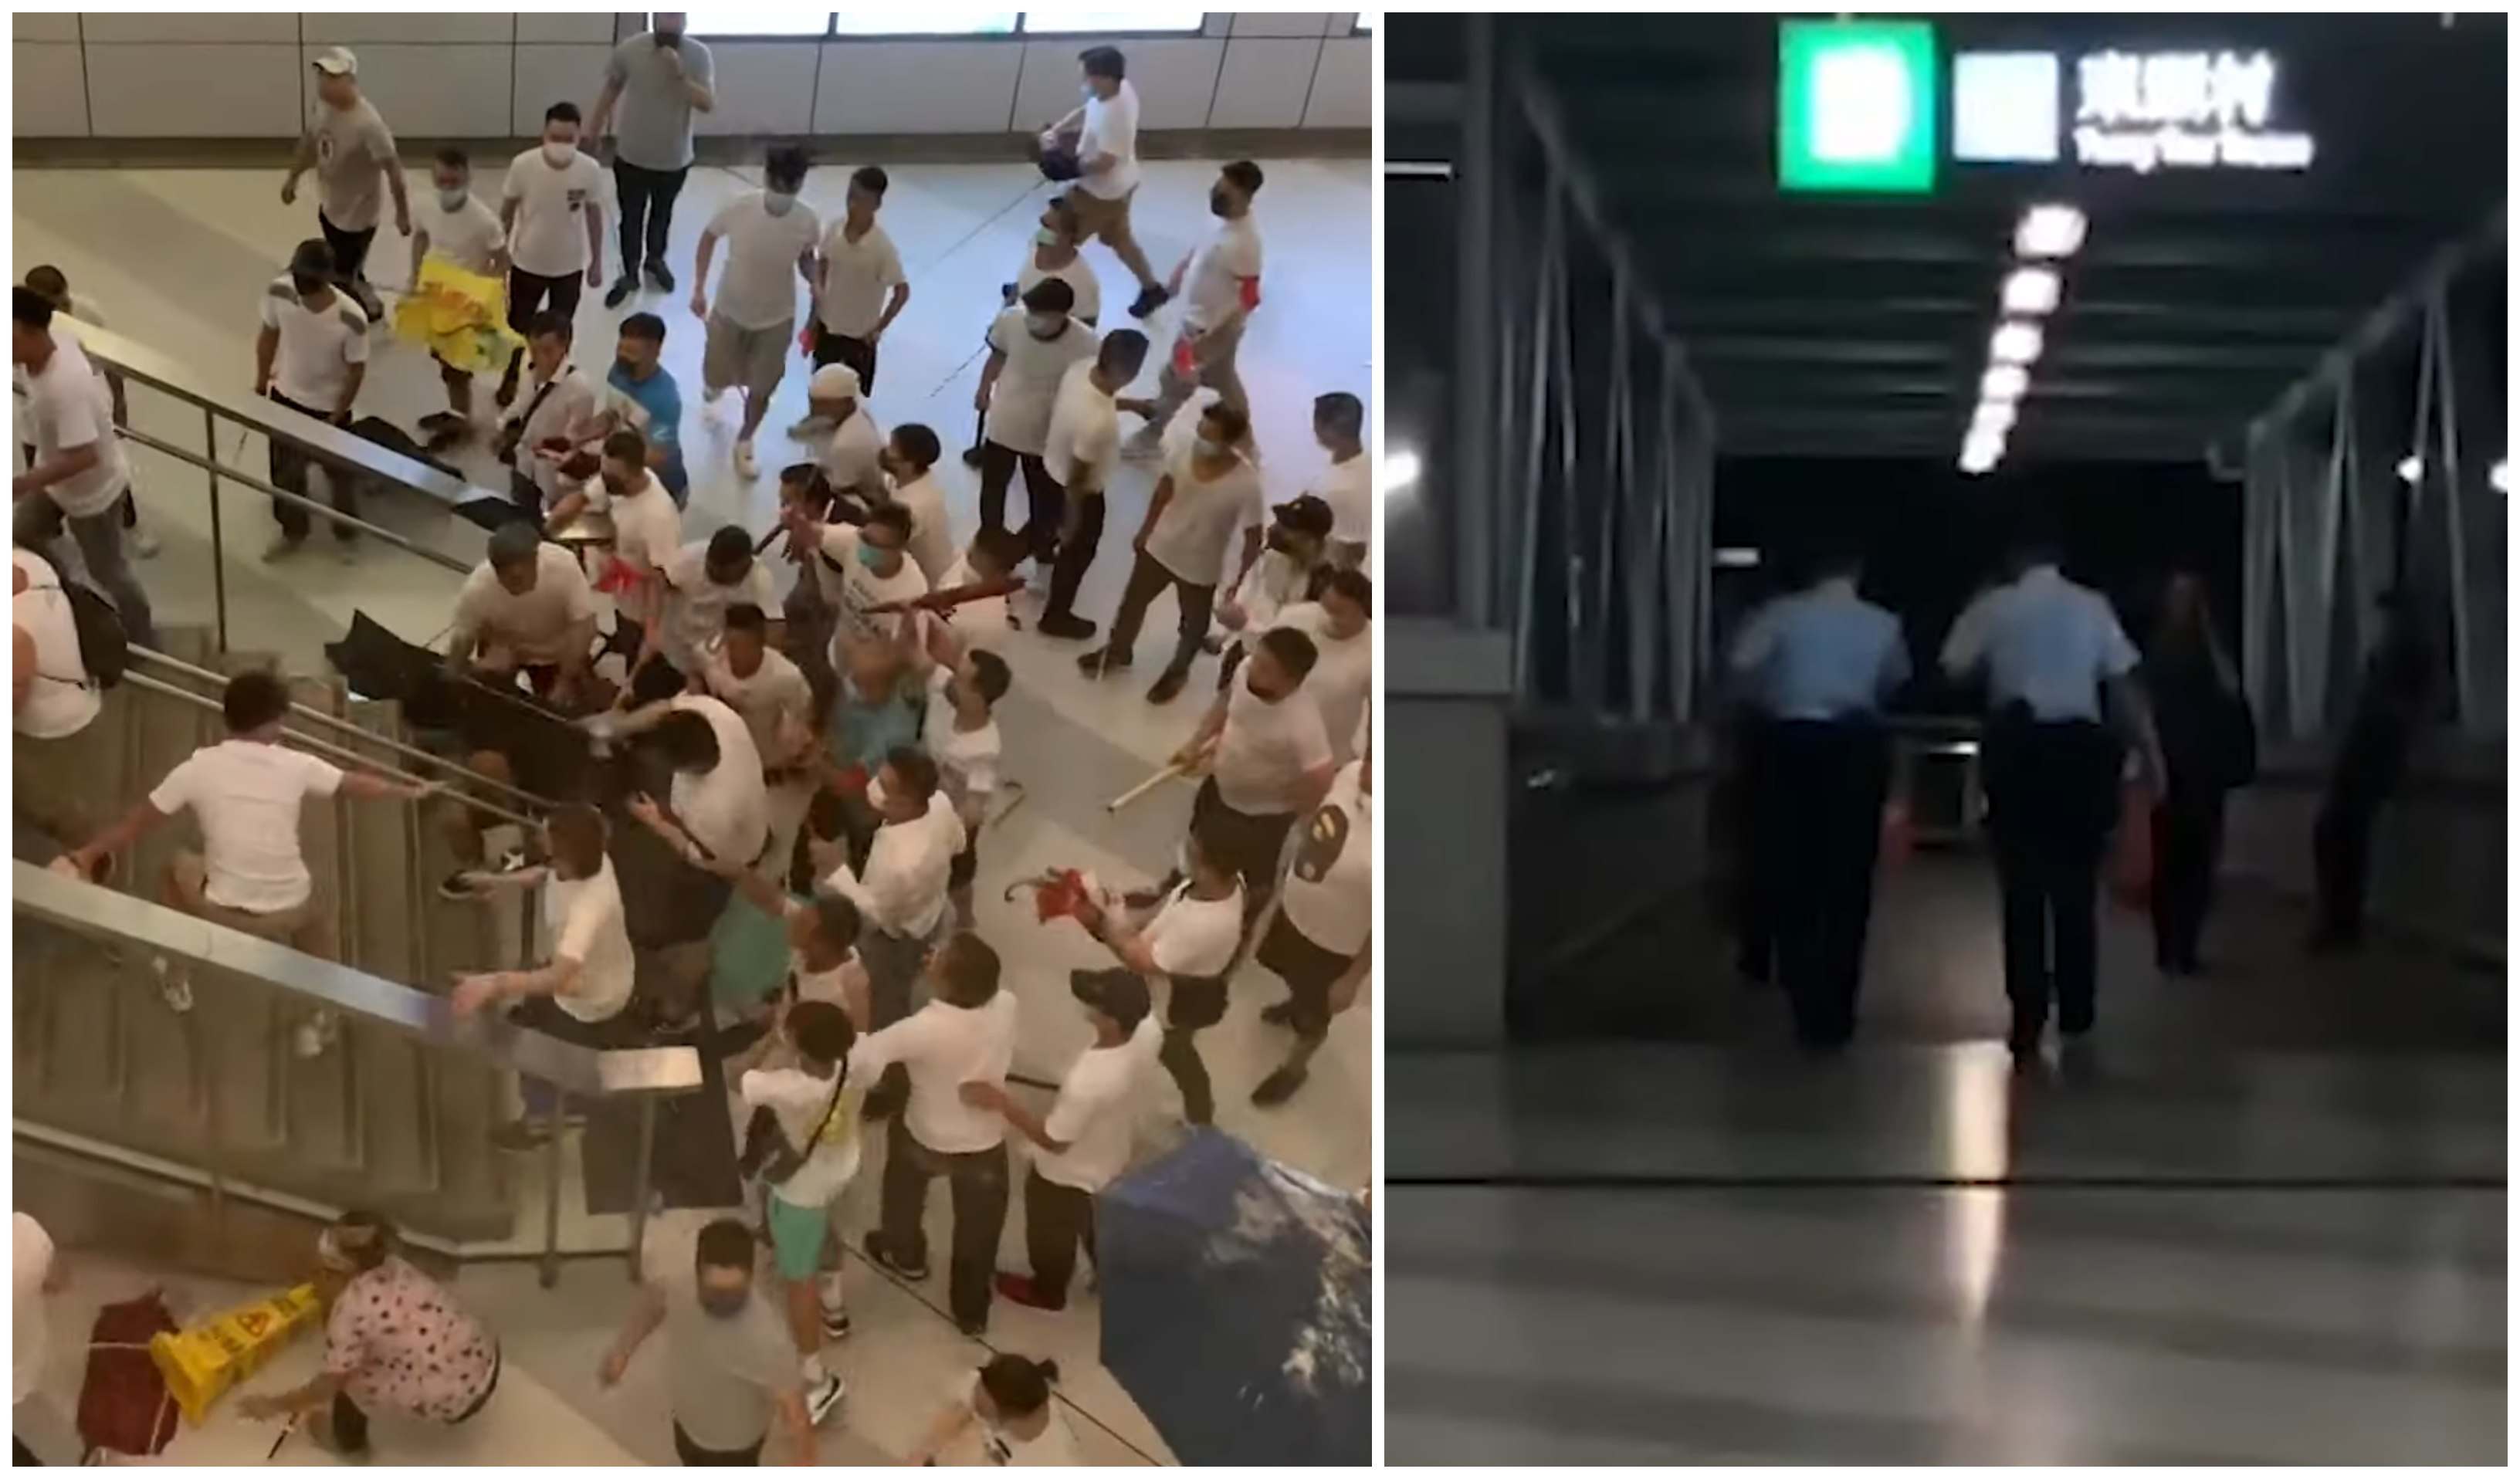 Pro-Beijing thugs attack protesters and commuters at the Yuen Long MTR station on July 21 (left), just moments after police left the station as the mob formed (right). Screengrabs via YouTube.